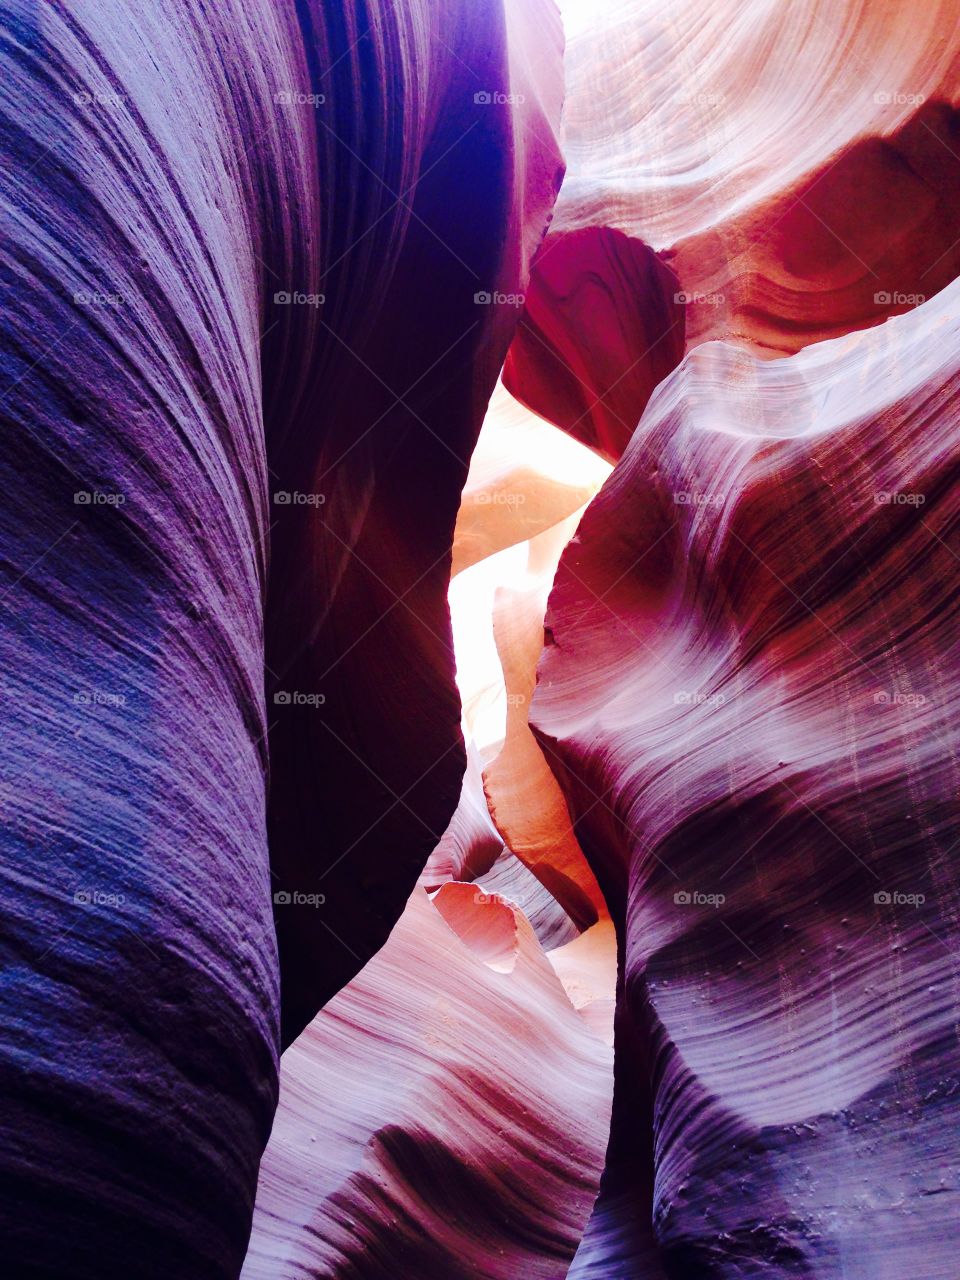 Lower Antelope Canyon in Page, AZ